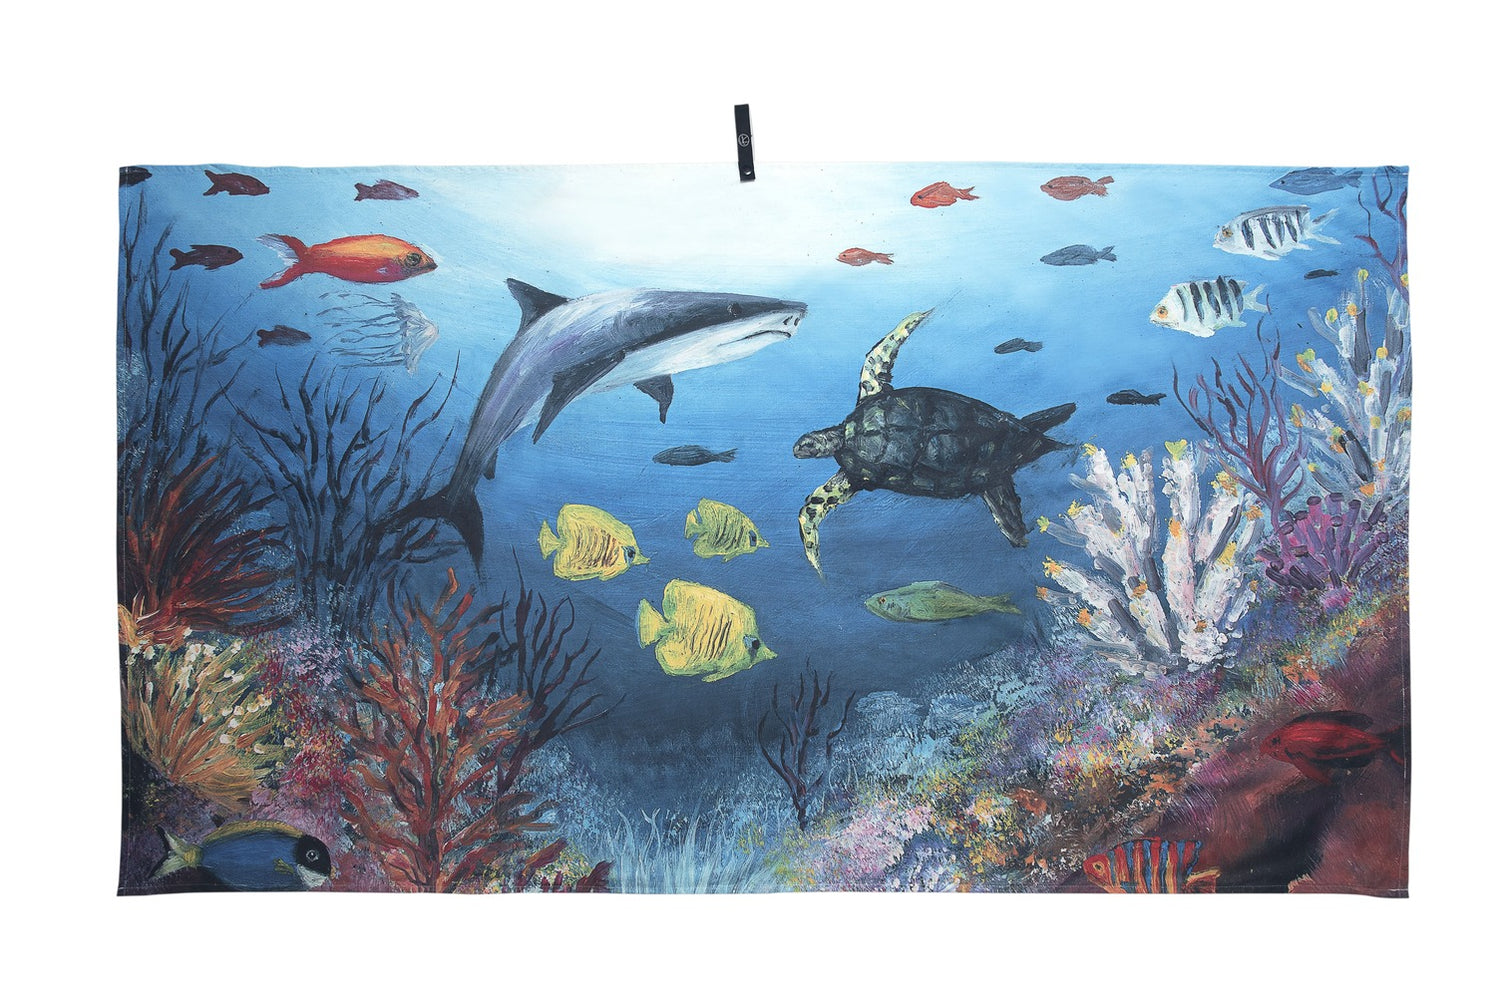 The Great Barrier Reef Microfibre Artistic Towel. This incredible artwork has vibrant colors and an intense blue. A shark, a turtle and many fishes swimming in between beautiful and colorful corals. This artwork is perfect for sea life enthusiasts, divers, beach lovers, kids and more. This towel is like nothing you have seen before! Large size, 170cm x 95cm, soft touch, highly absorbent and quick-drying, compact towel. An Aussie-inspired art showcasing magnificent landmarks and the Aussie lifestyle.